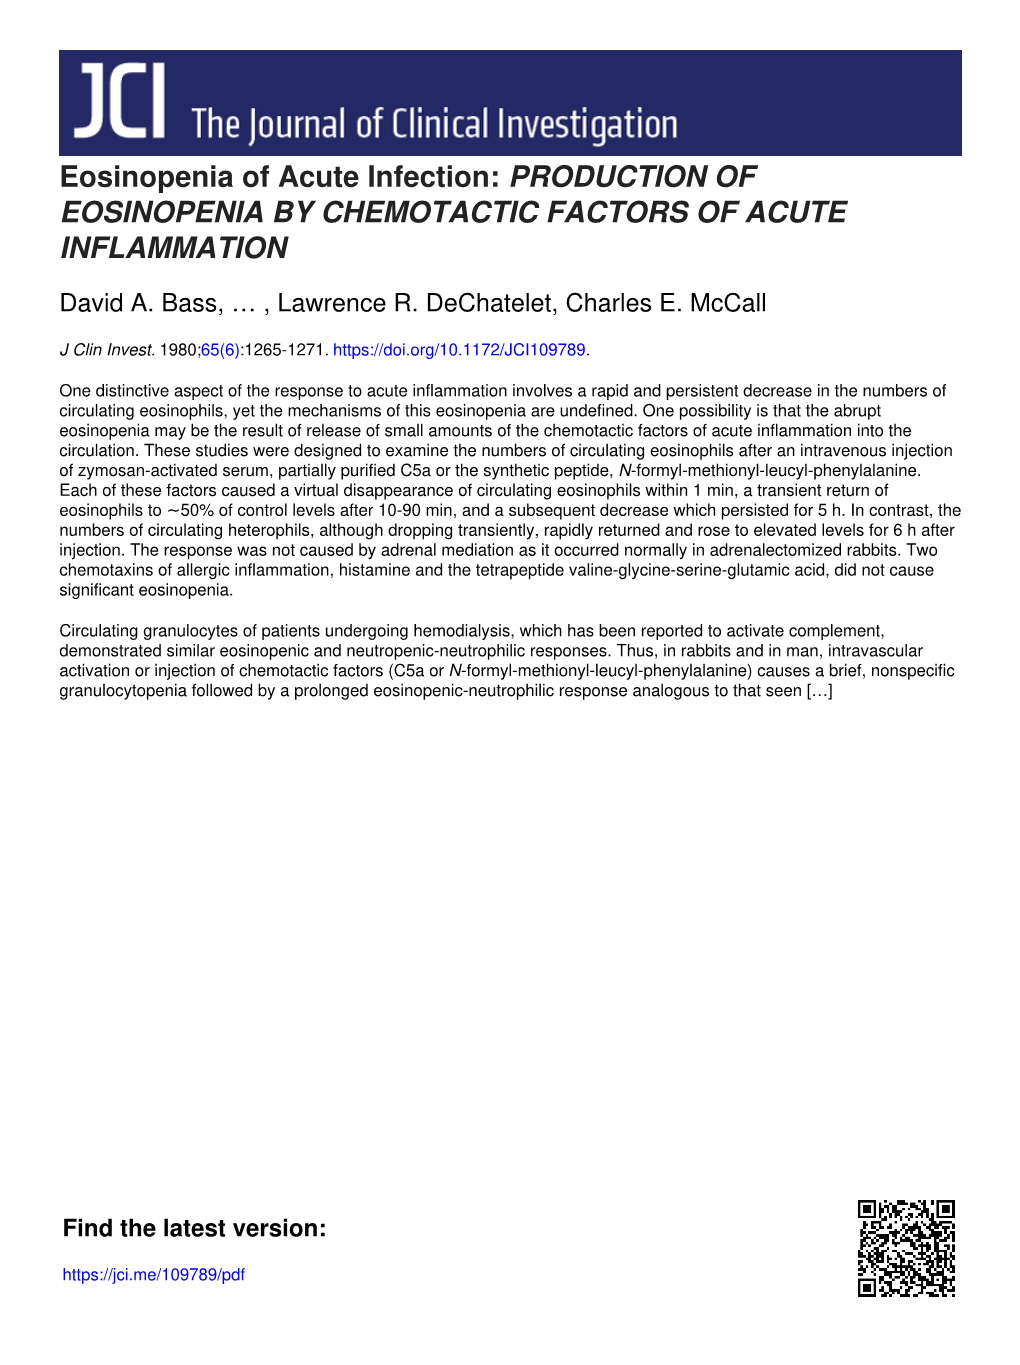 Eosinopenia of Acute Infection: PRODUCTION of EOSINOPENIA by CHEMOTACTIC FACTORS of ACUTE INFLAMMATION